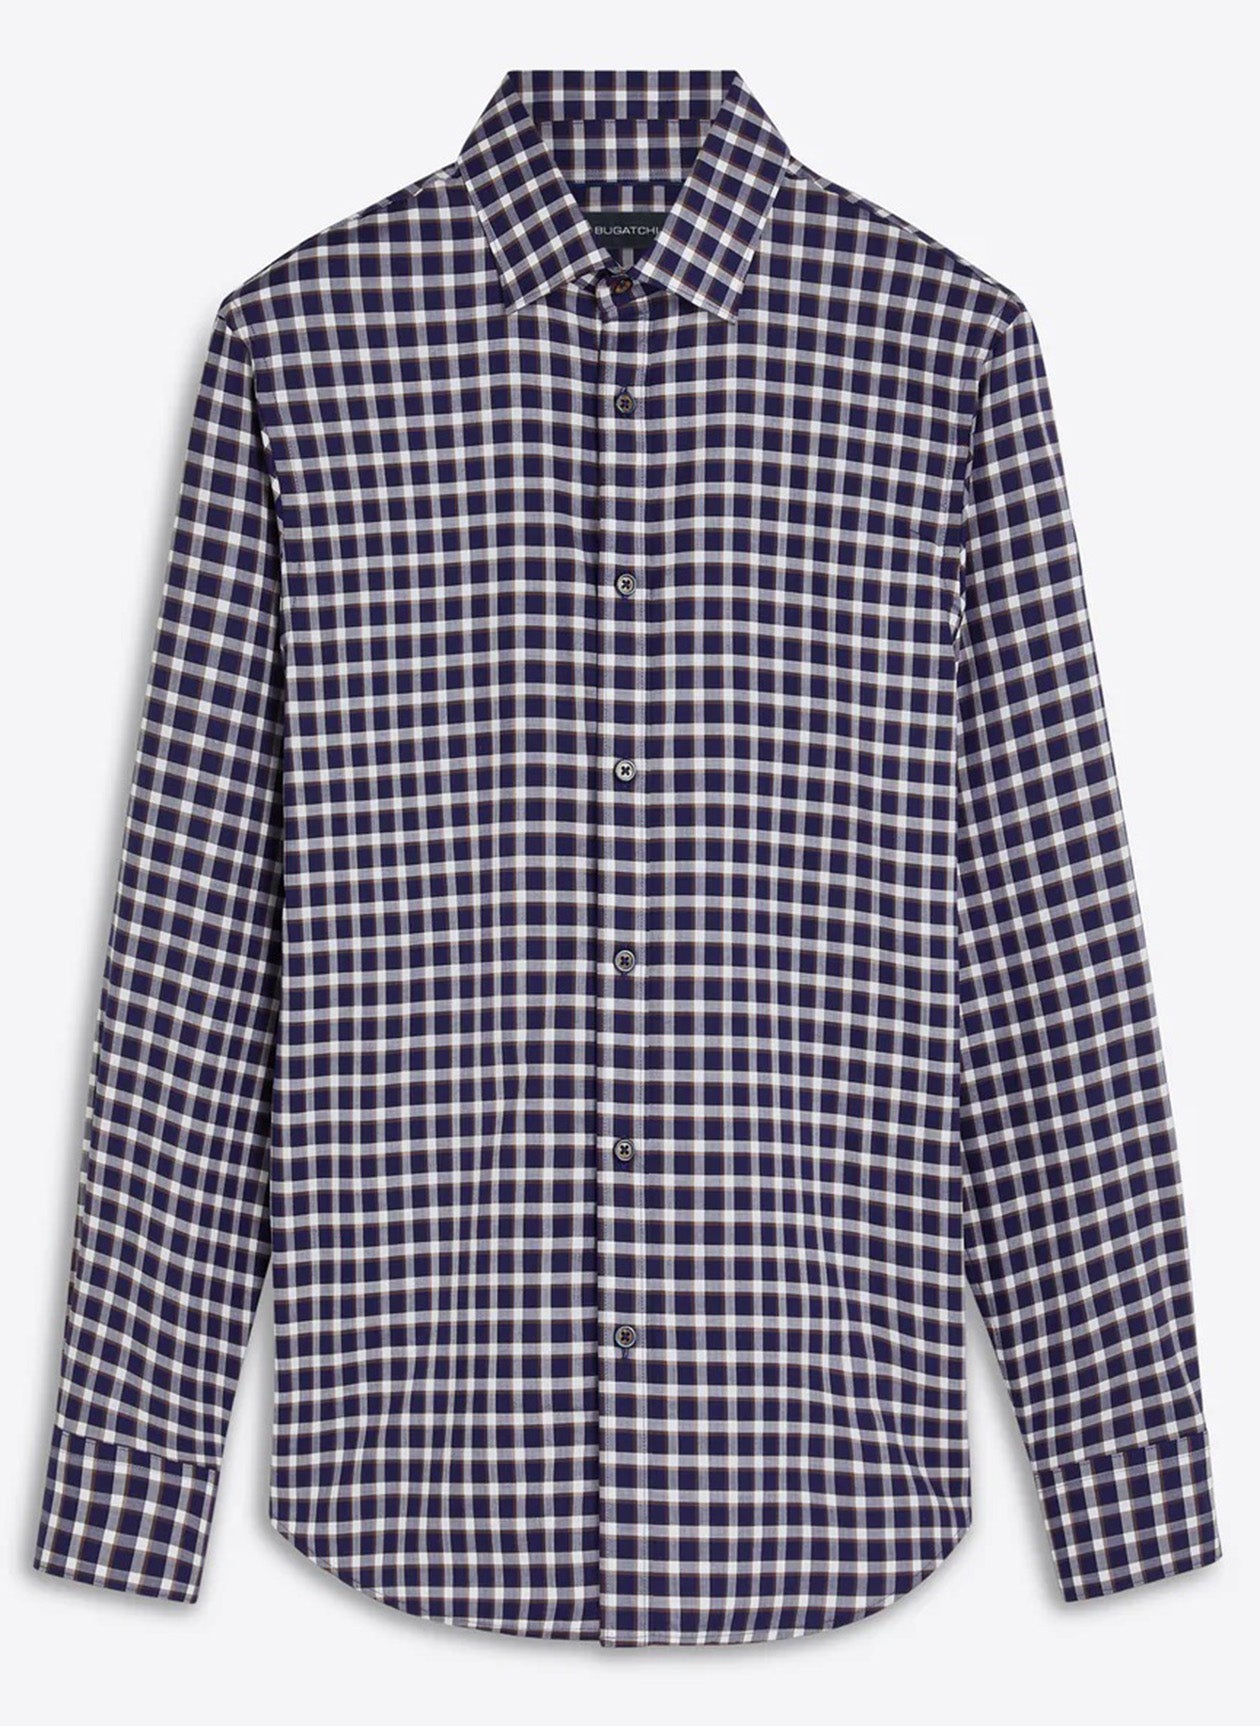 NAVY BROWN AND WHITE SHADOW CHECK SHAPED FIT SHIRT - NAVY